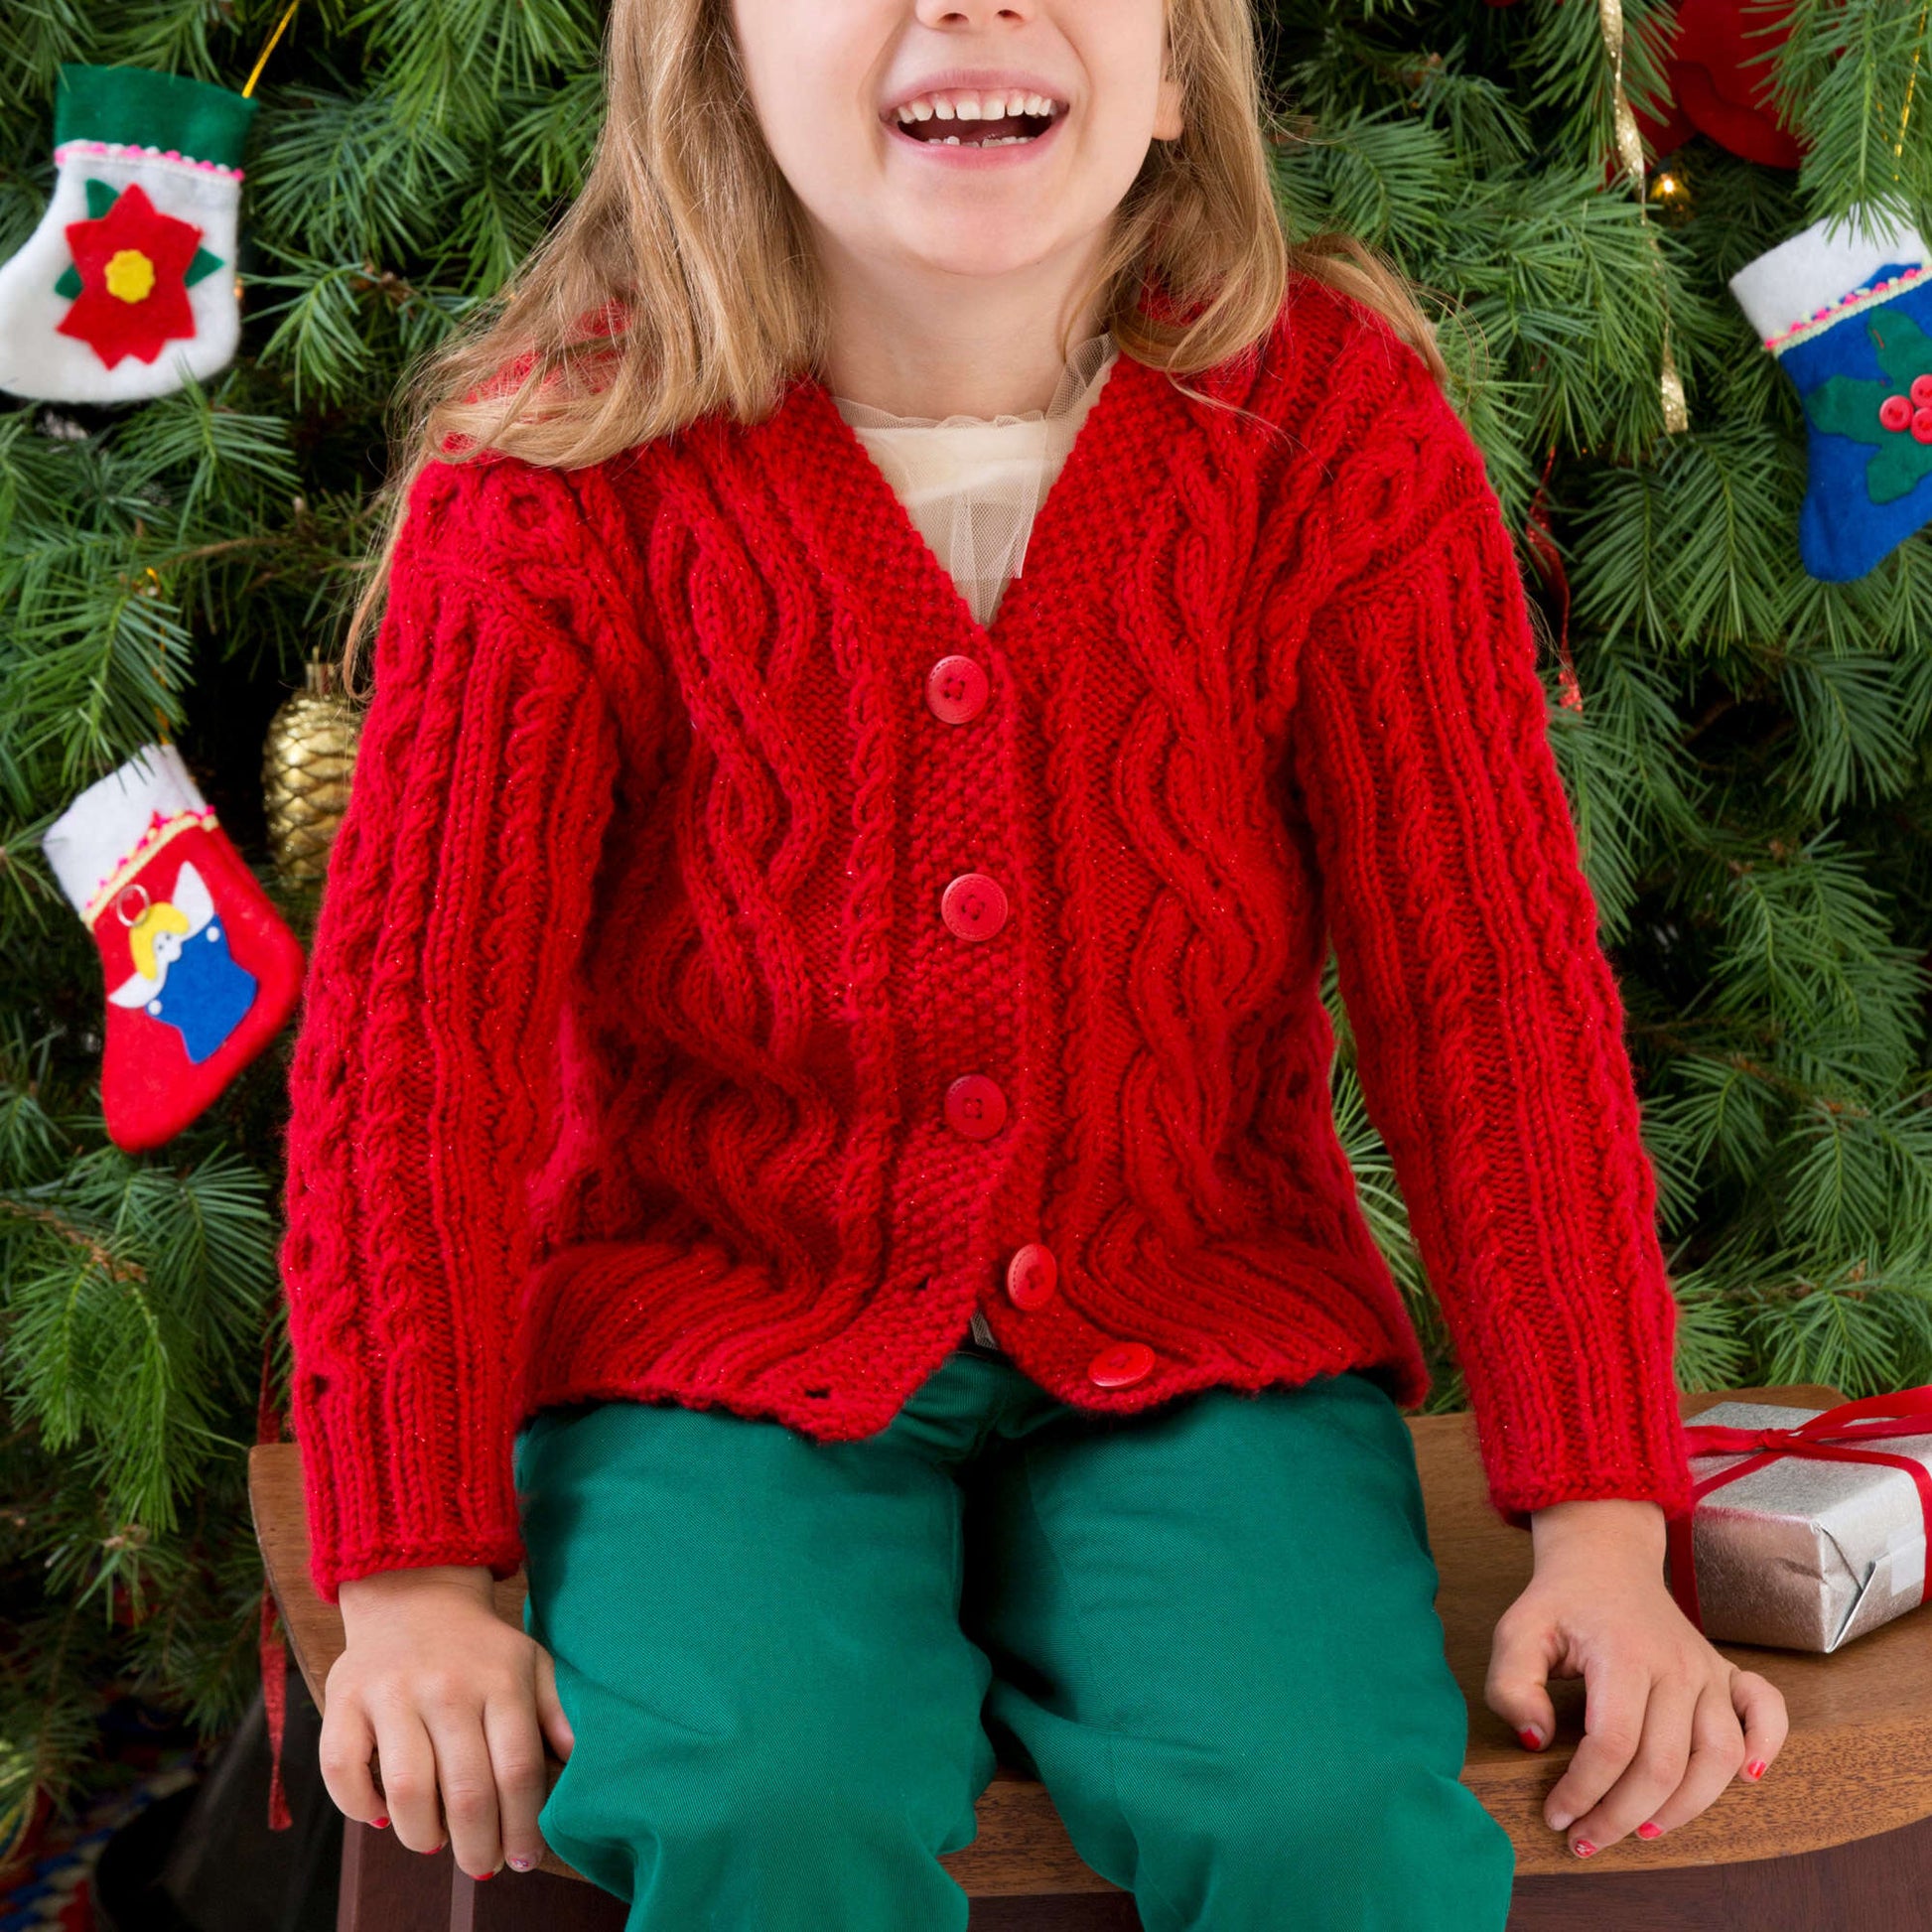 Free Red Heart Knit Waiting For Santa Sweater Pattern